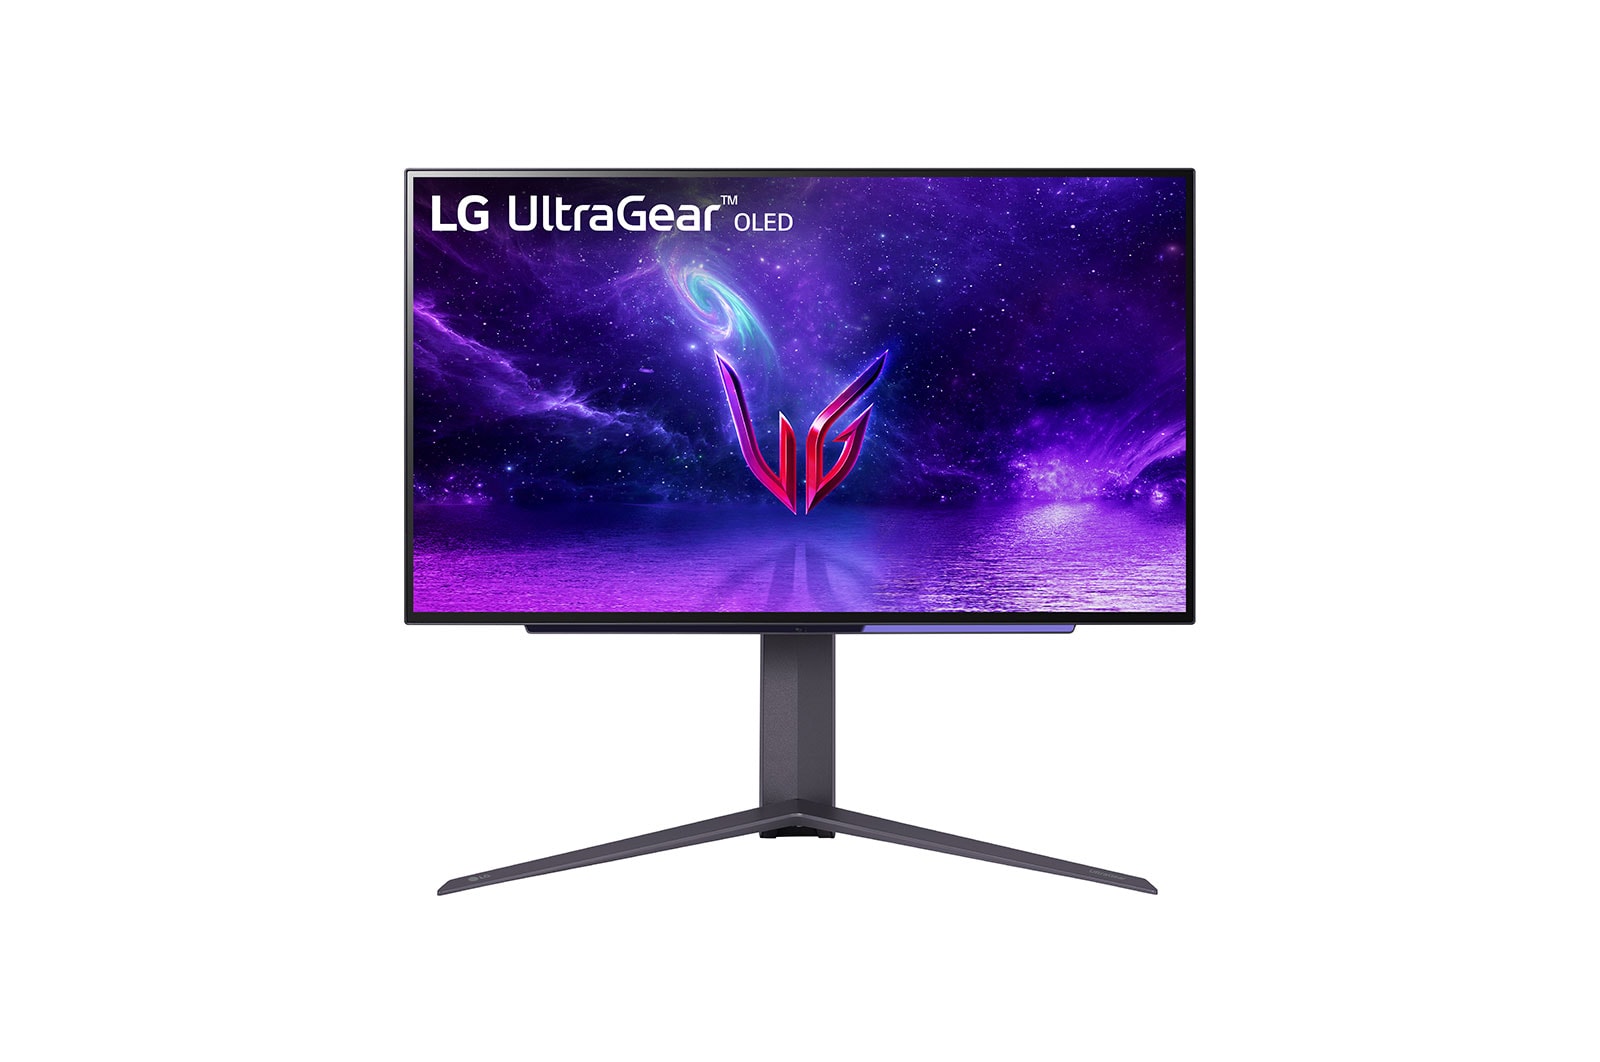 Media asset in full size related to 3dfxzone.it news item entitled as follows: LG lancia il gaming monitor UltraGear OLED 27-inch con refresh rate fino a 240Hz | Image Name: news33884_LG-UltraGear-OLED_27-inch_1.jpg